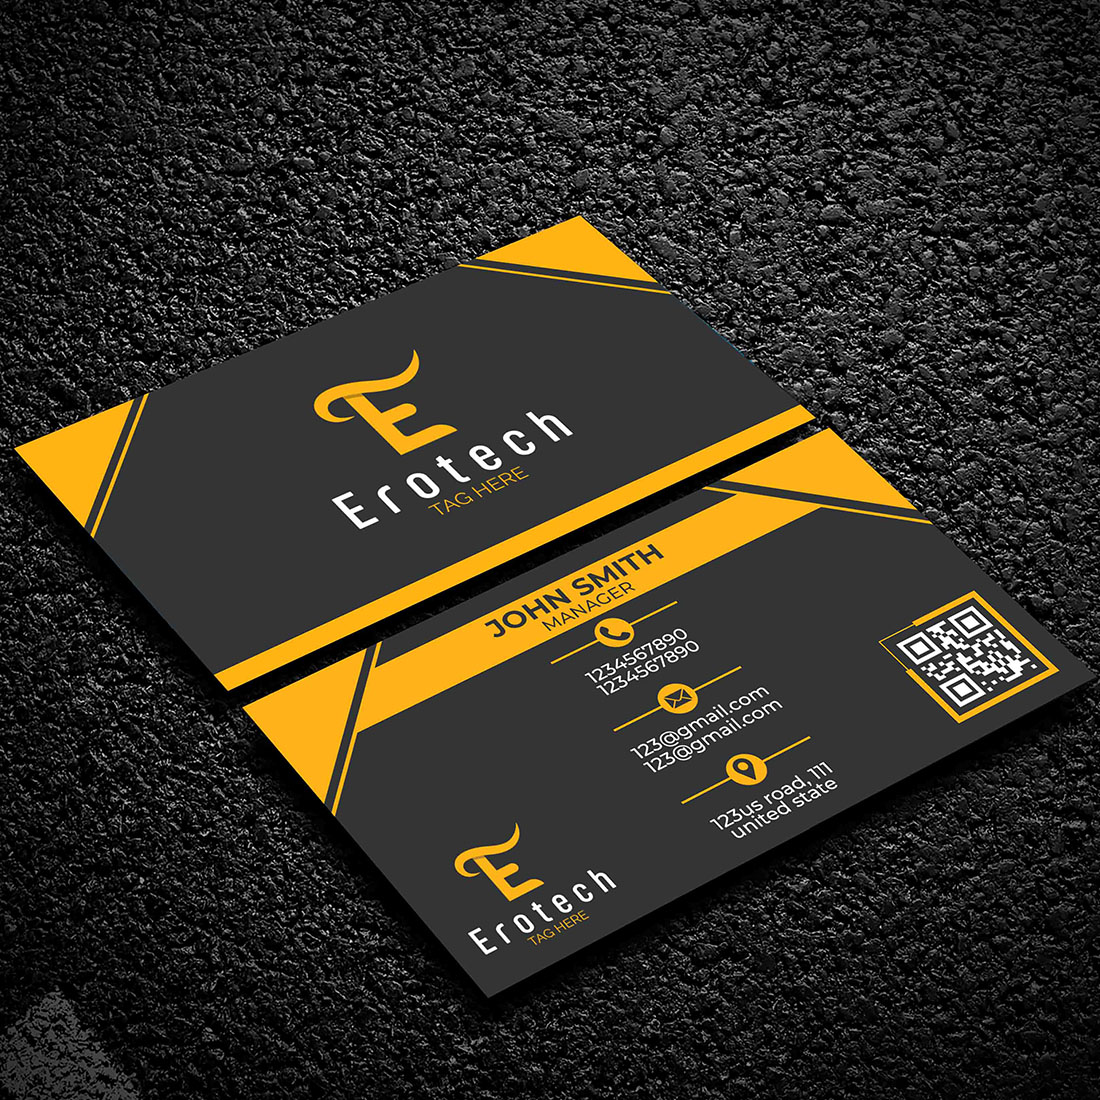 Professional and creative business card design template psd file, ai file, eps file preview image.